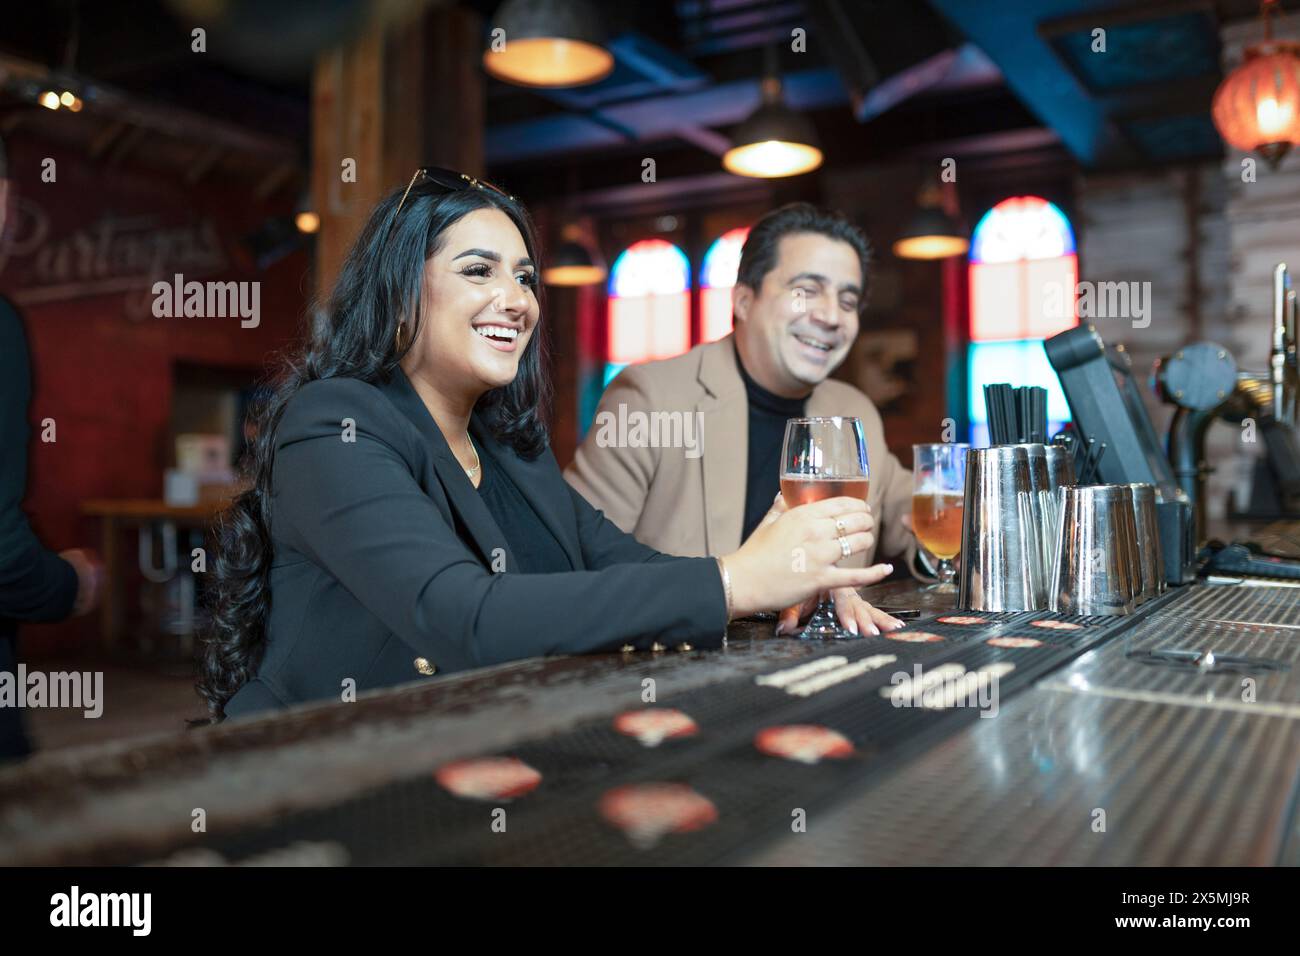 Smiling man and woman drinking alcohol in bar Stock Photo